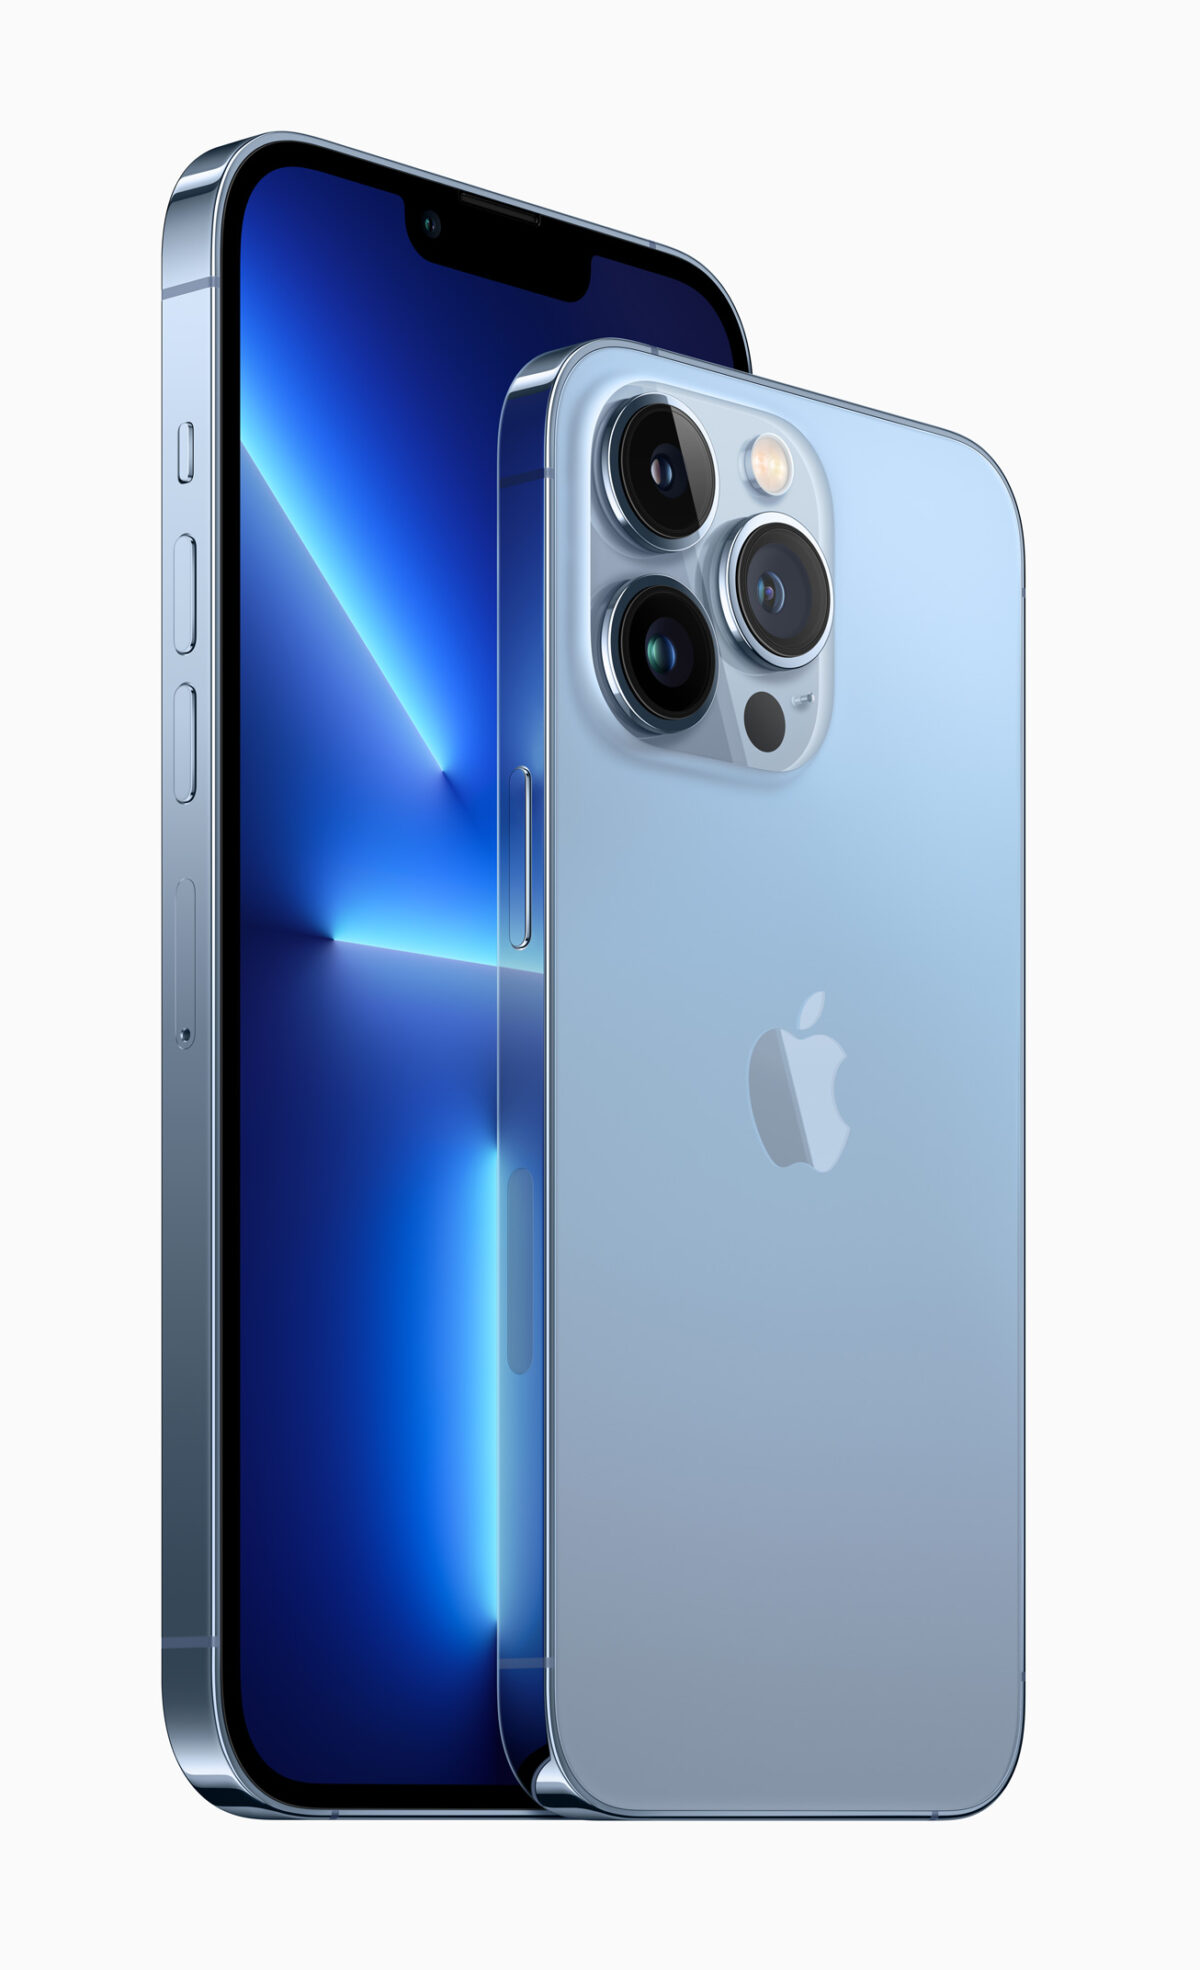 The iPhone 13 Pro features a Pro Motion display, new camera system